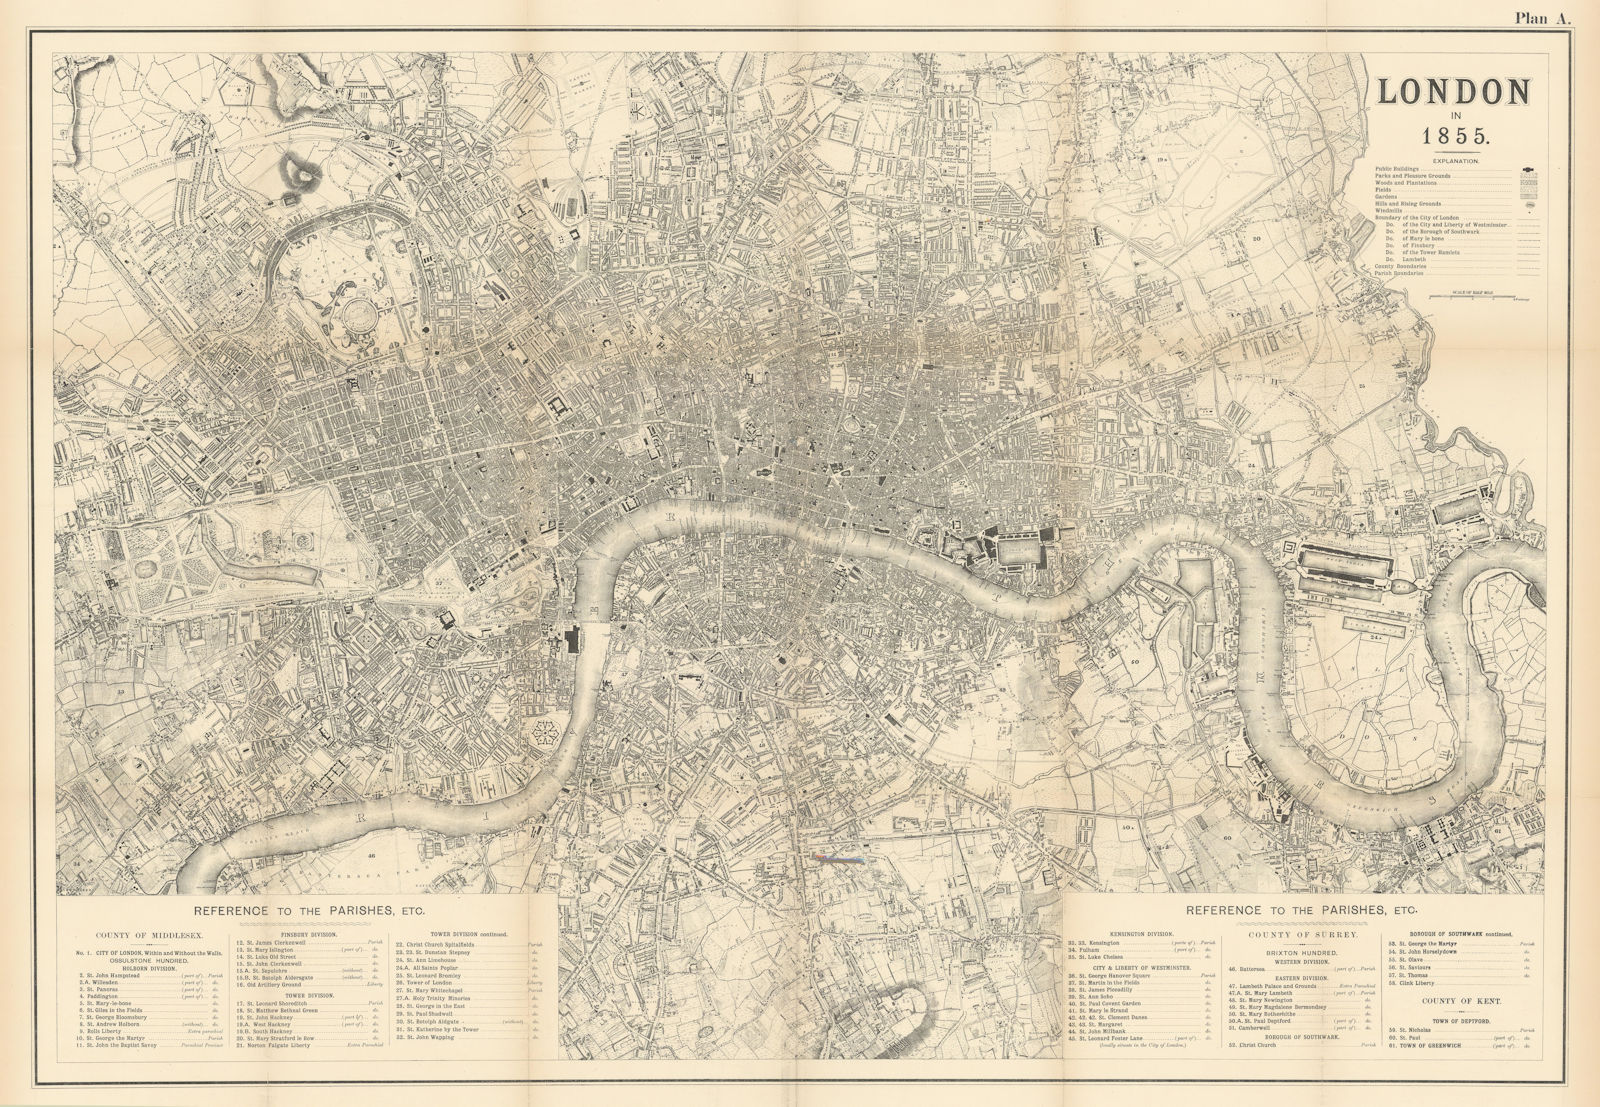 Associate Product Large map of London in 1855 by Percy Edwards. 71x103 cm 1898 old antique